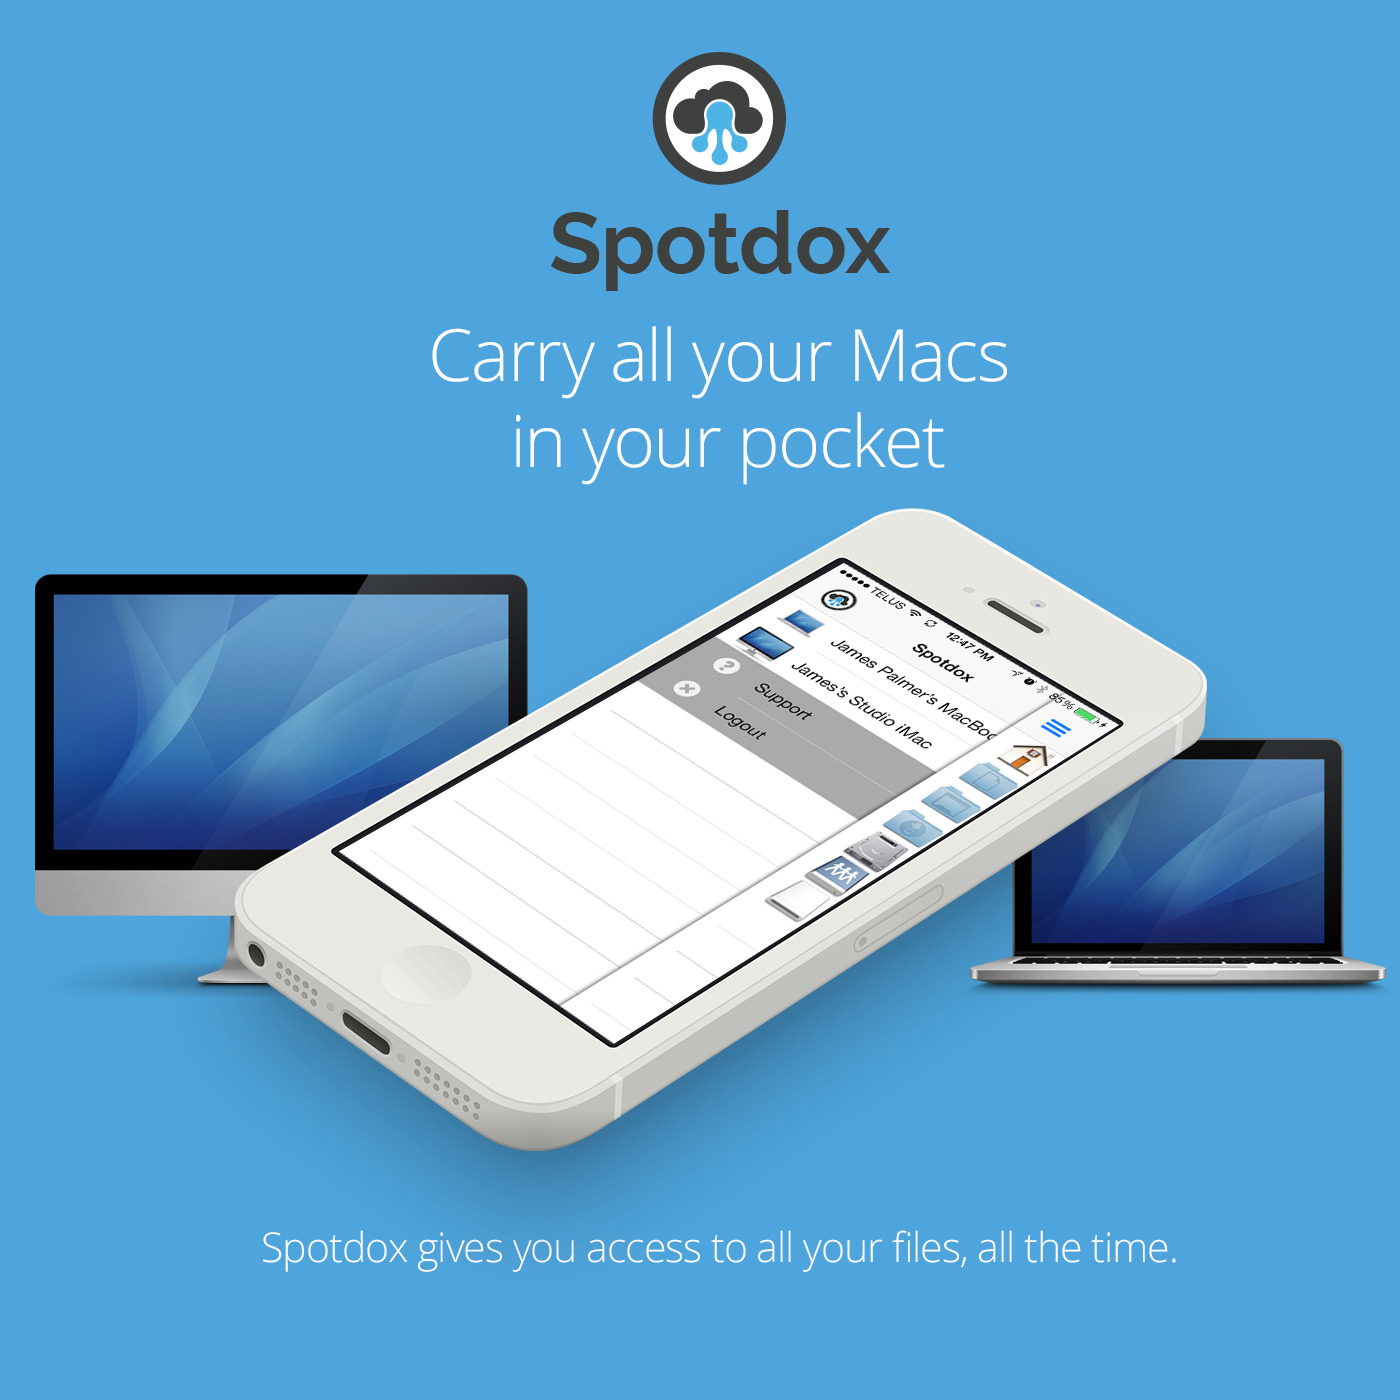 Spotdox is Yep and Leap on the iPhone